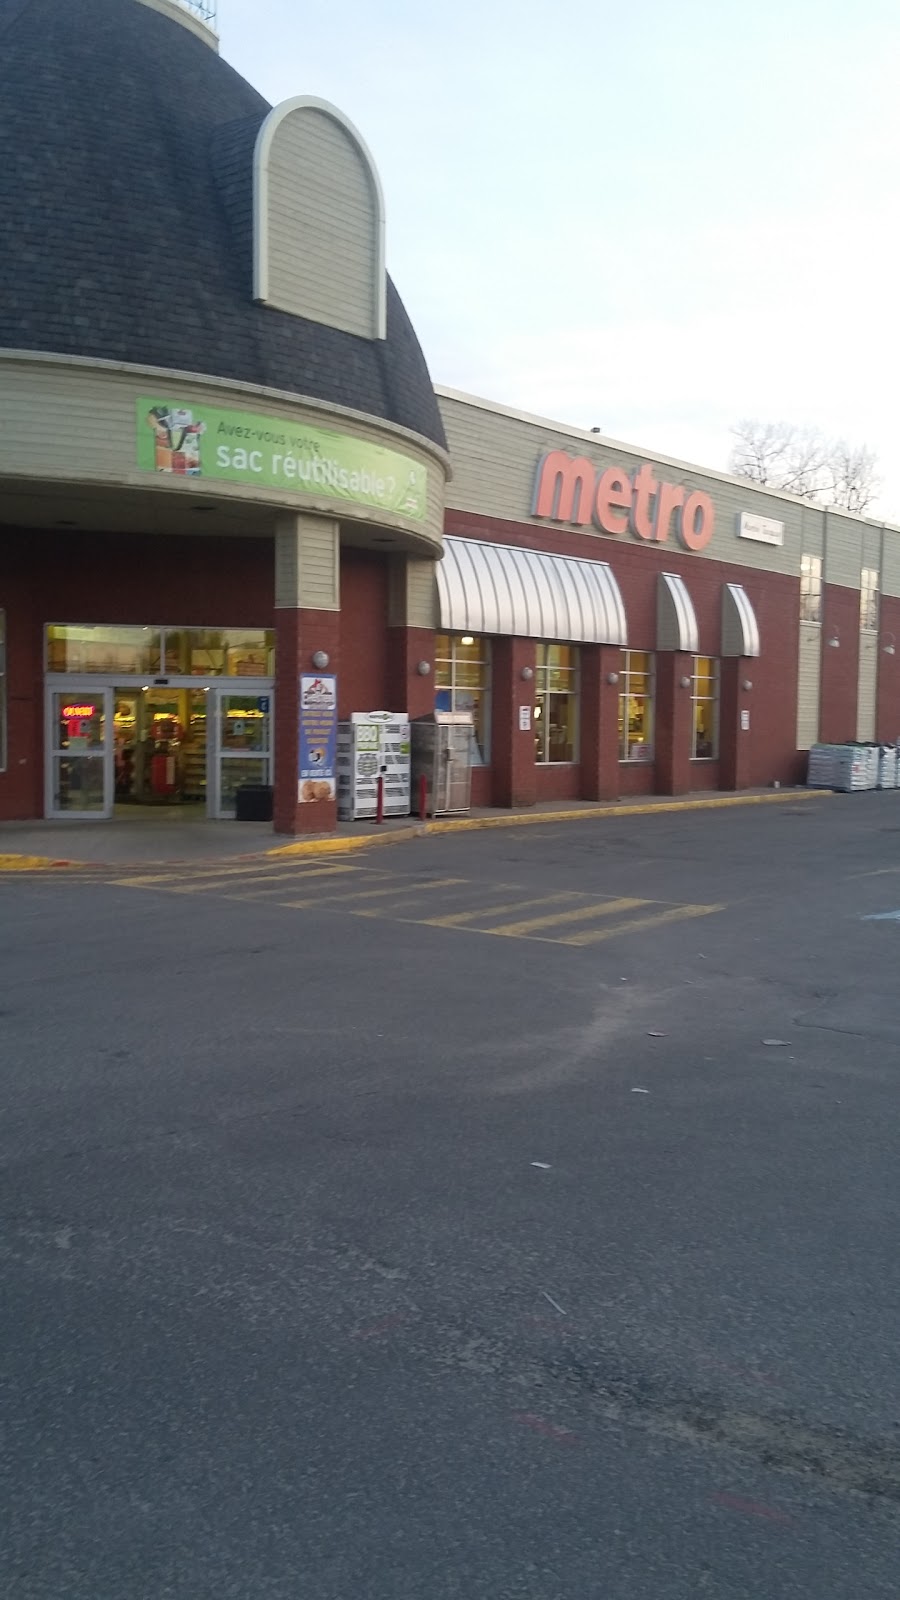 Metro Tanguay Papineauville | store | 377 Rue Papineau, Papineauville, QC J0V 1R0, Canada | 8194278667 OR +1 819-427-8667